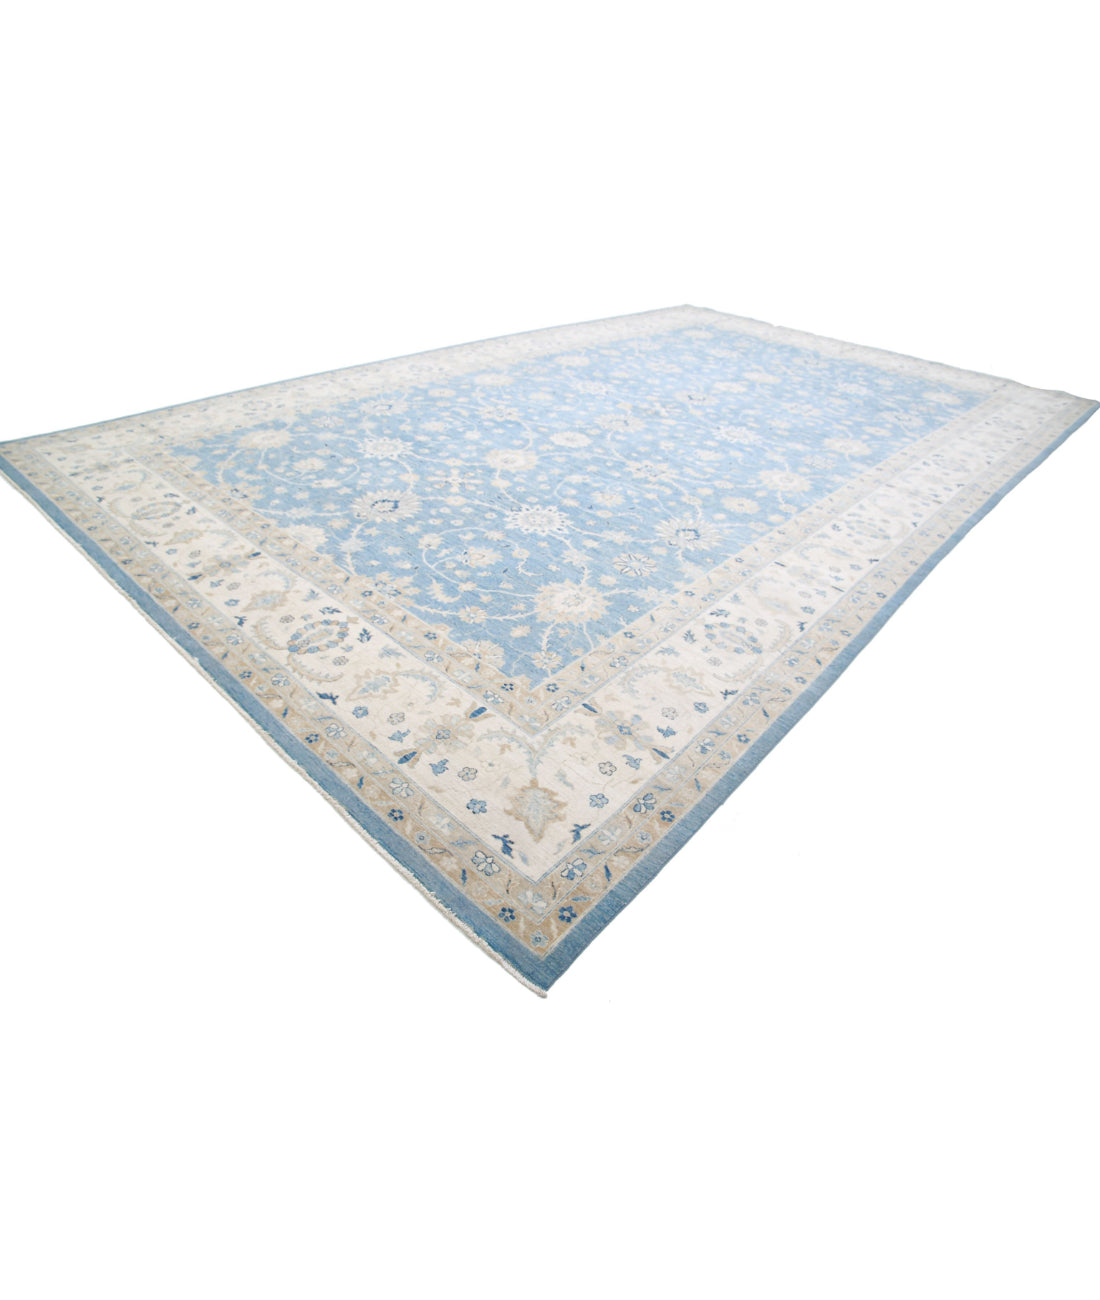 Serenity-hand-knotted-farhan-wool-rug-5013266-2